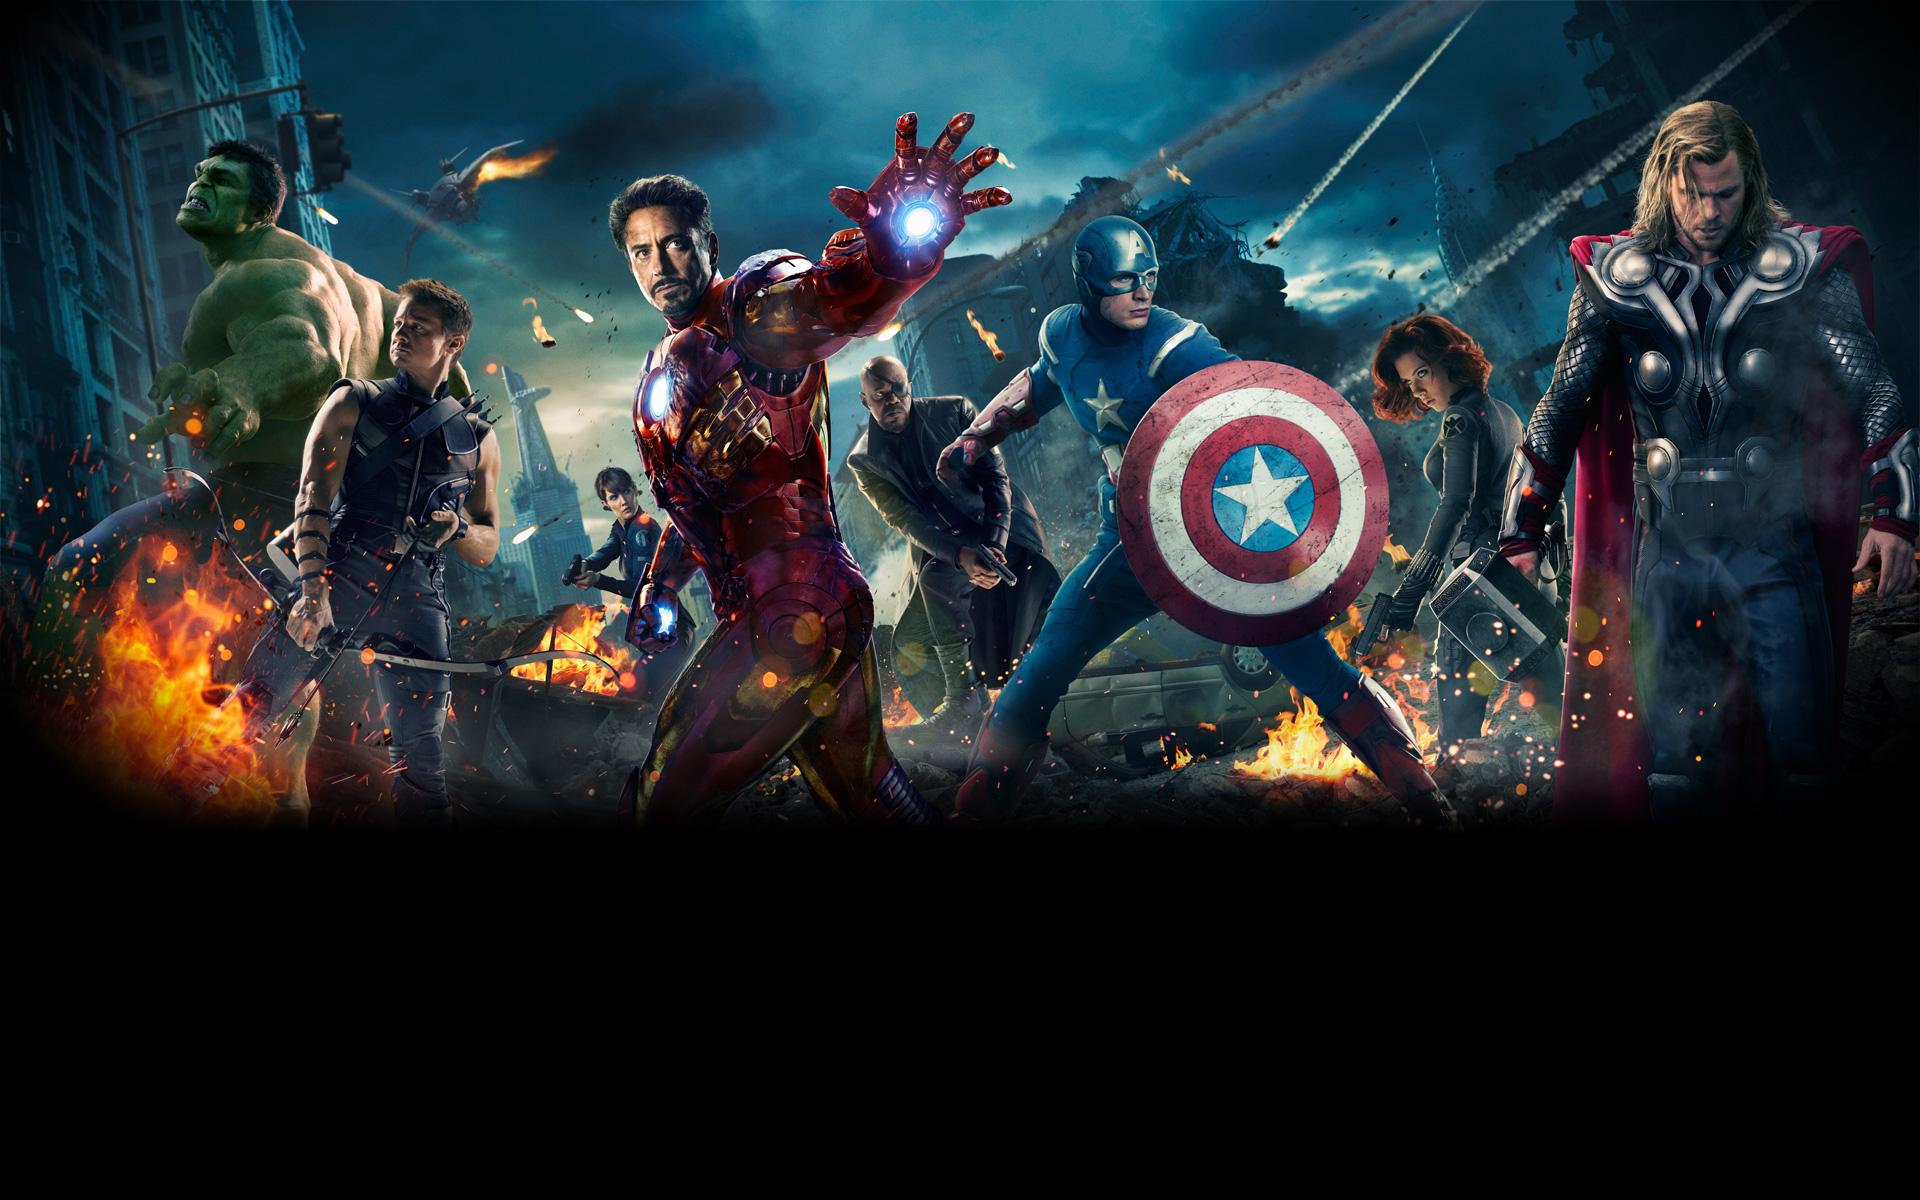 The Avengers Posters & Wallpaper